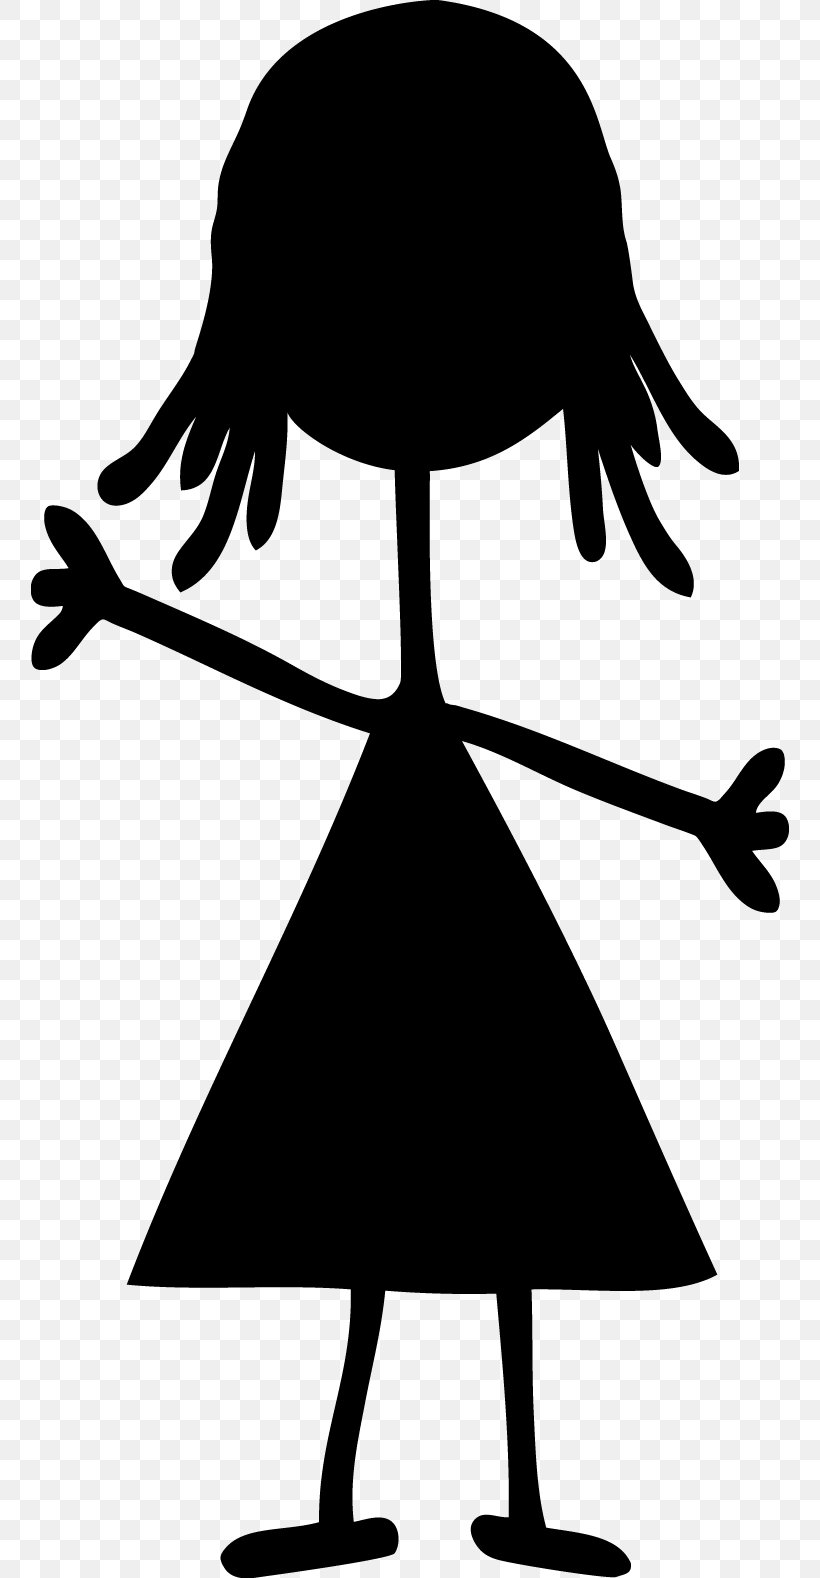 Clip Art Silhouette Stick Figure Drawing Image, PNG, 758x1578px ...